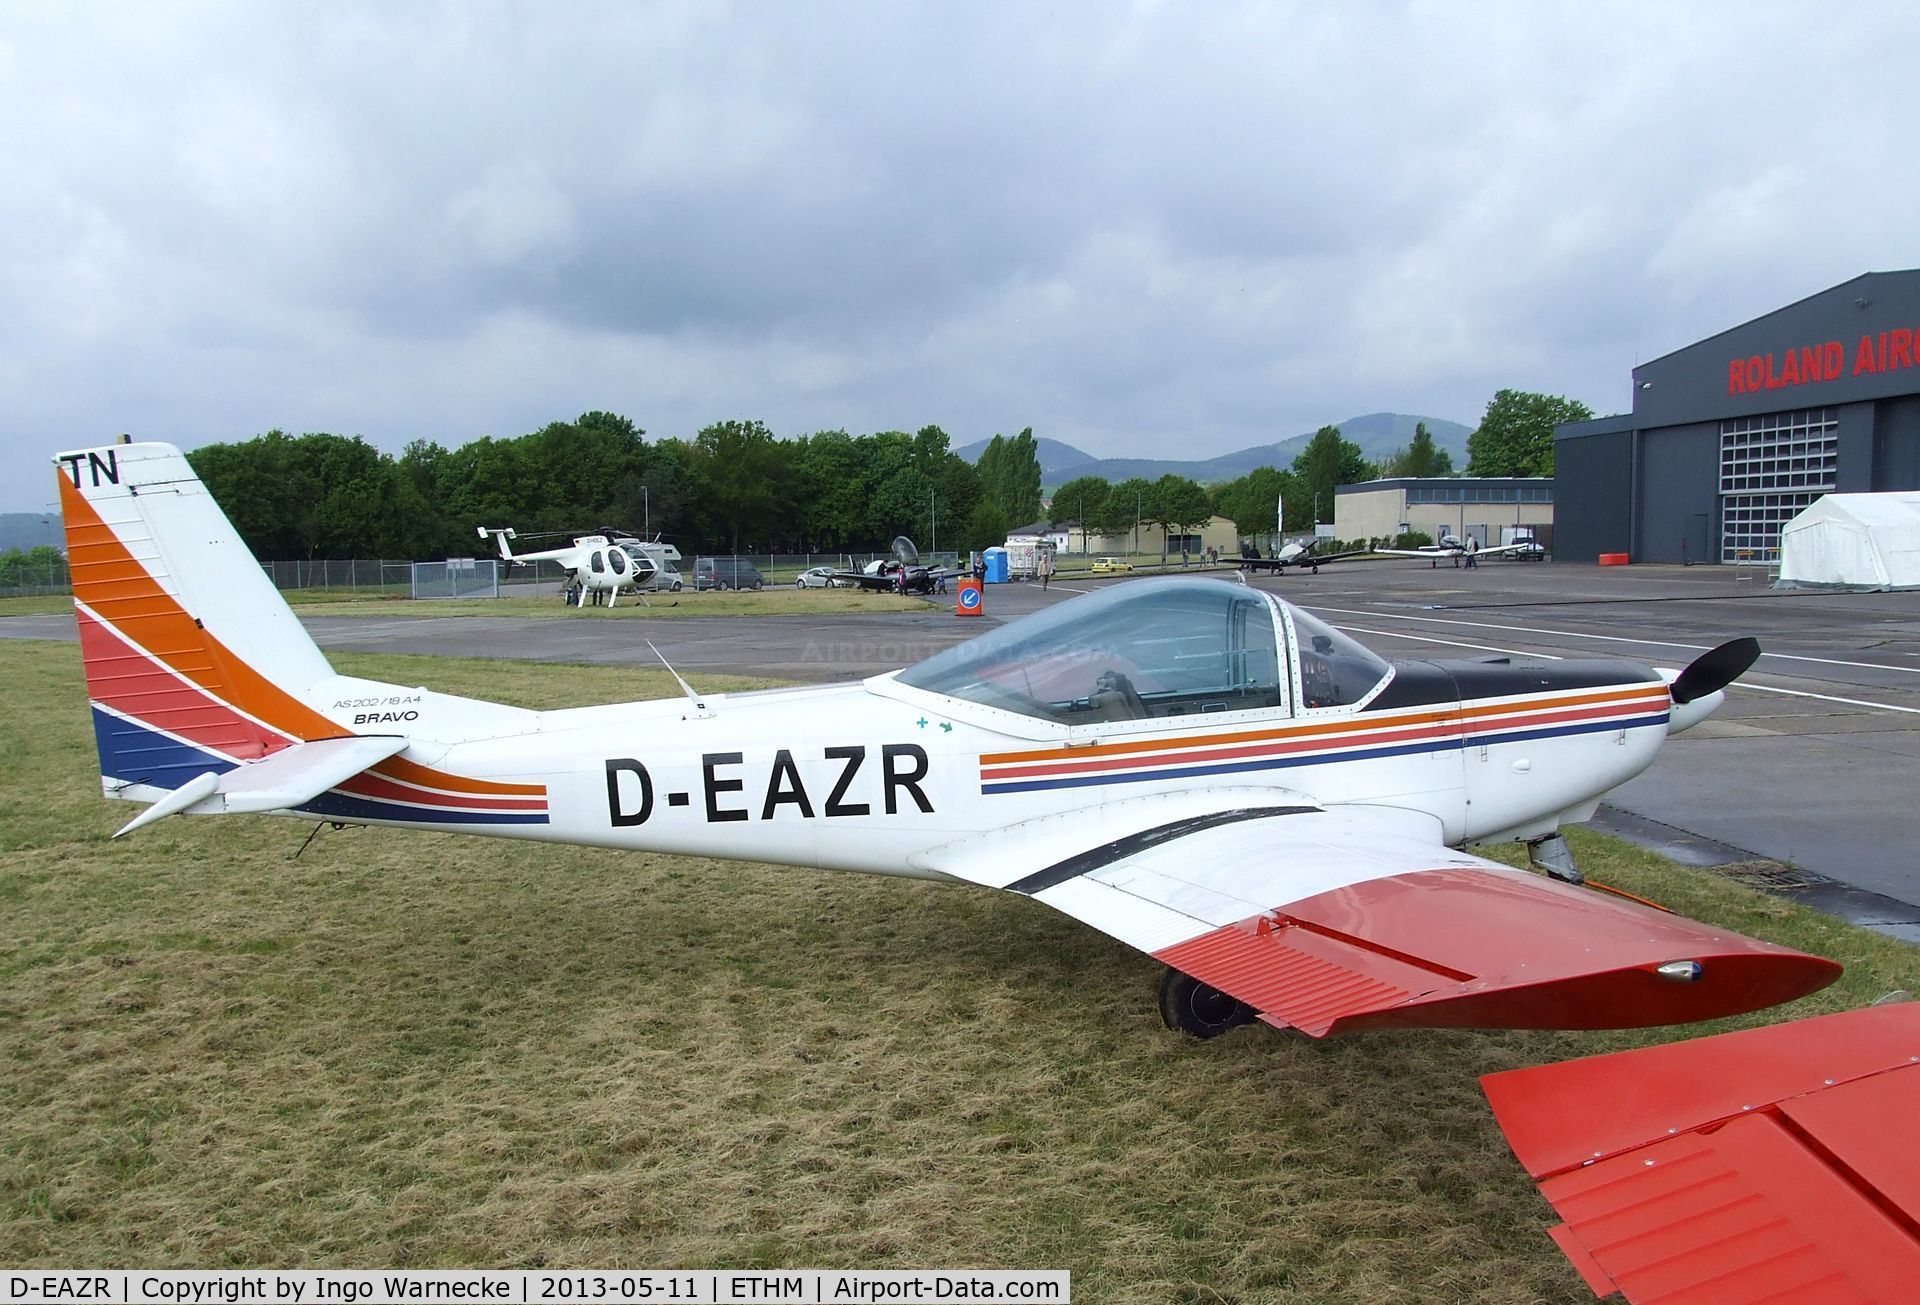 D-EAZR, 1988 FFA AS-202/18A-4 Bravo C/N 233, FFA AS.202/18 A4 Bravo during an open day at the Fliegendes Museum Mendig (Flying Museum) at former German Army Aviation base, now civilian Mendig airfield